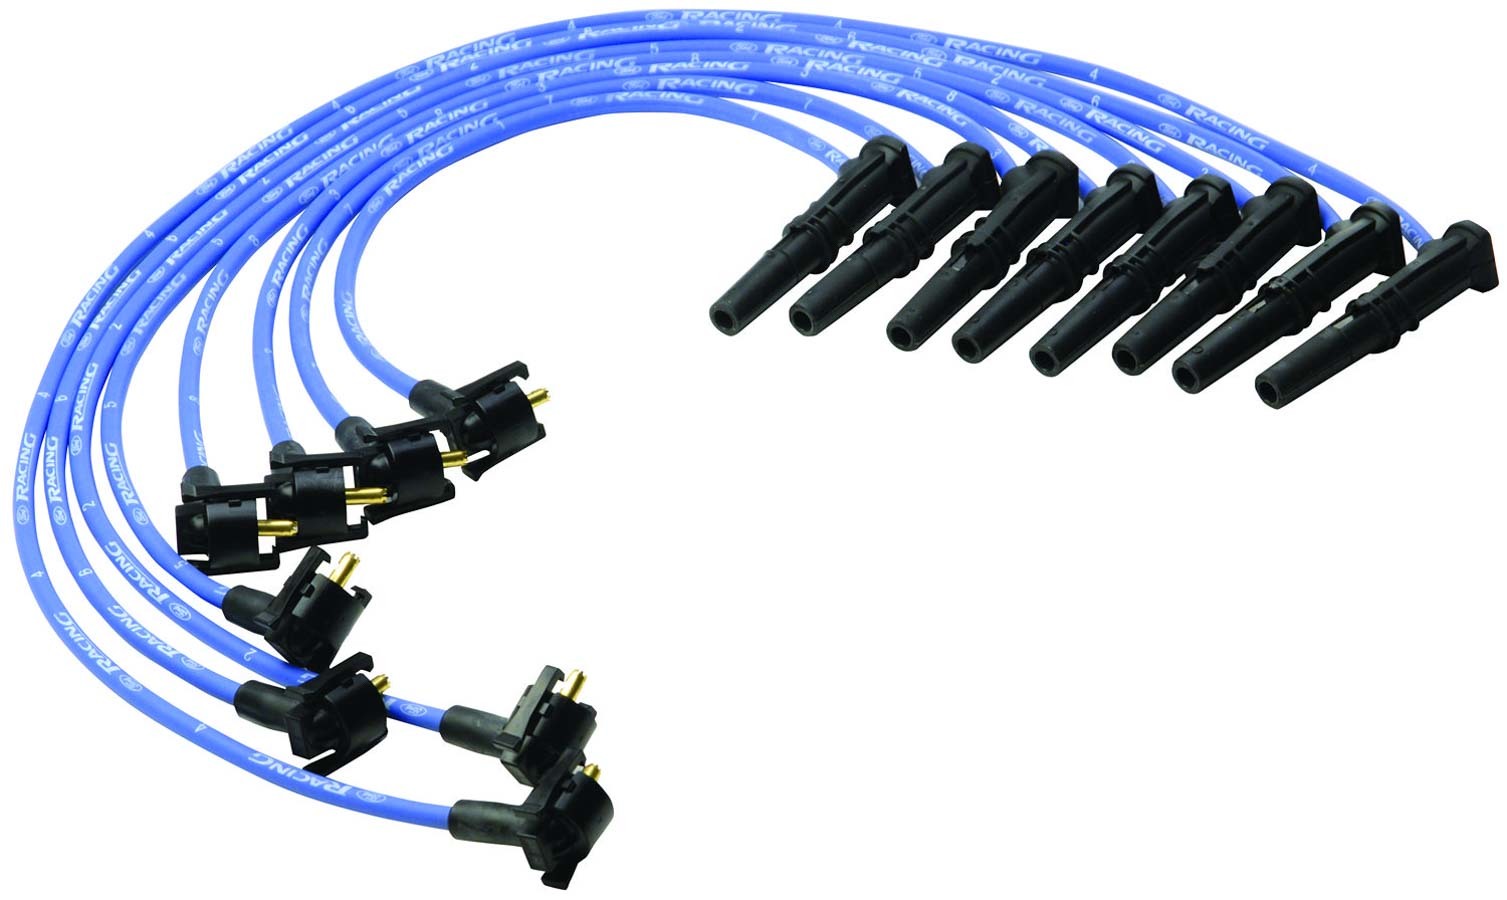 Ford Performance M12259-C462 Spark Plug Wire Set, Ford Racing, Spiral Core, 9 mm, Blue, 45 Degree Plug Boots, HEI Style Terminal, 2 Valve, Ford Modular, Kit